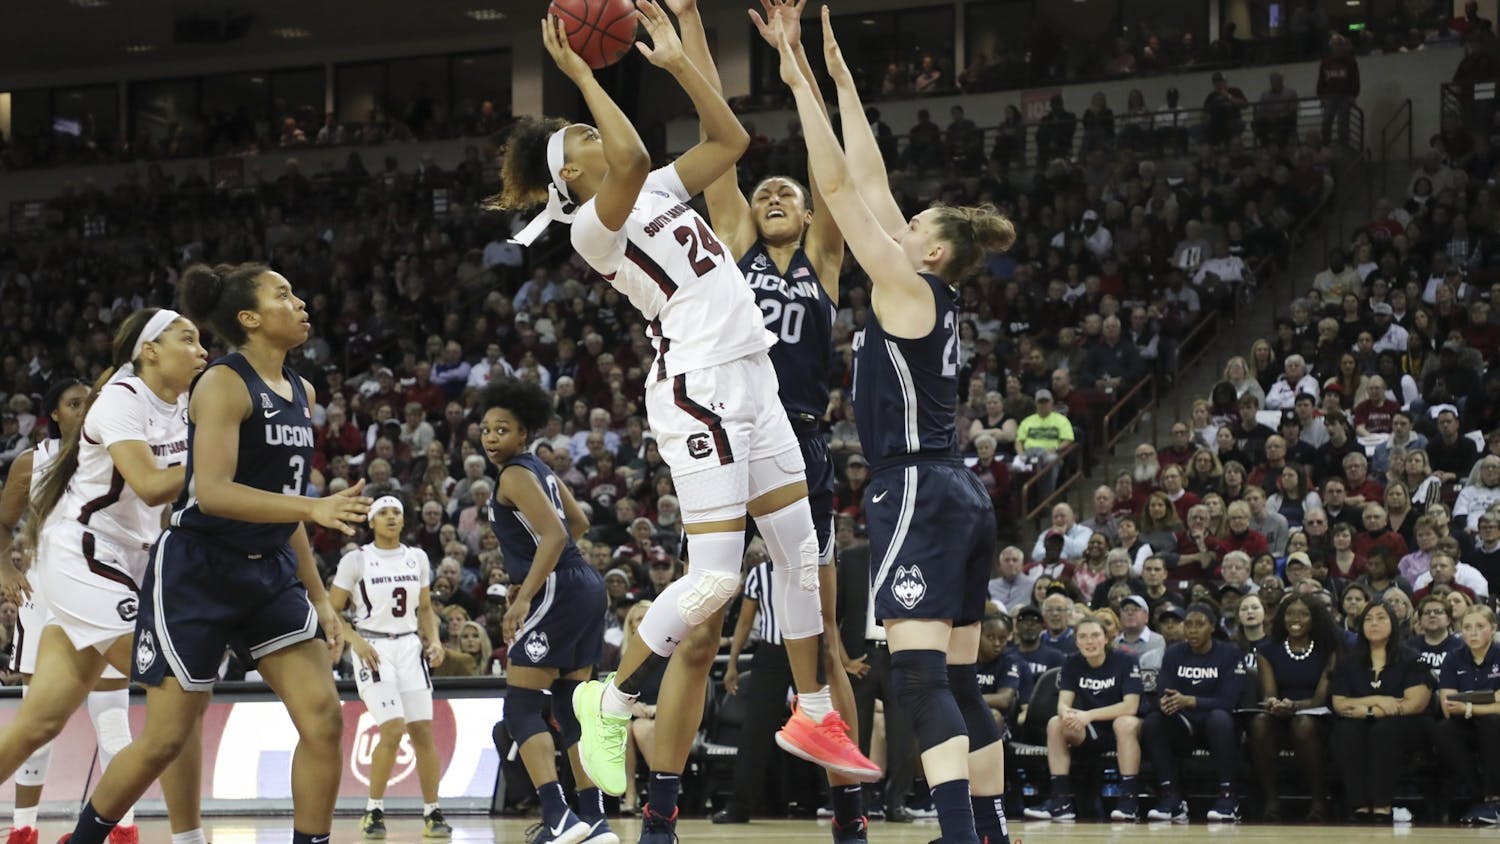 Junior guard Lele Grissett goes up for a shot while UConn players attempt to block her. Grissett scored 2 points against the Huskies.